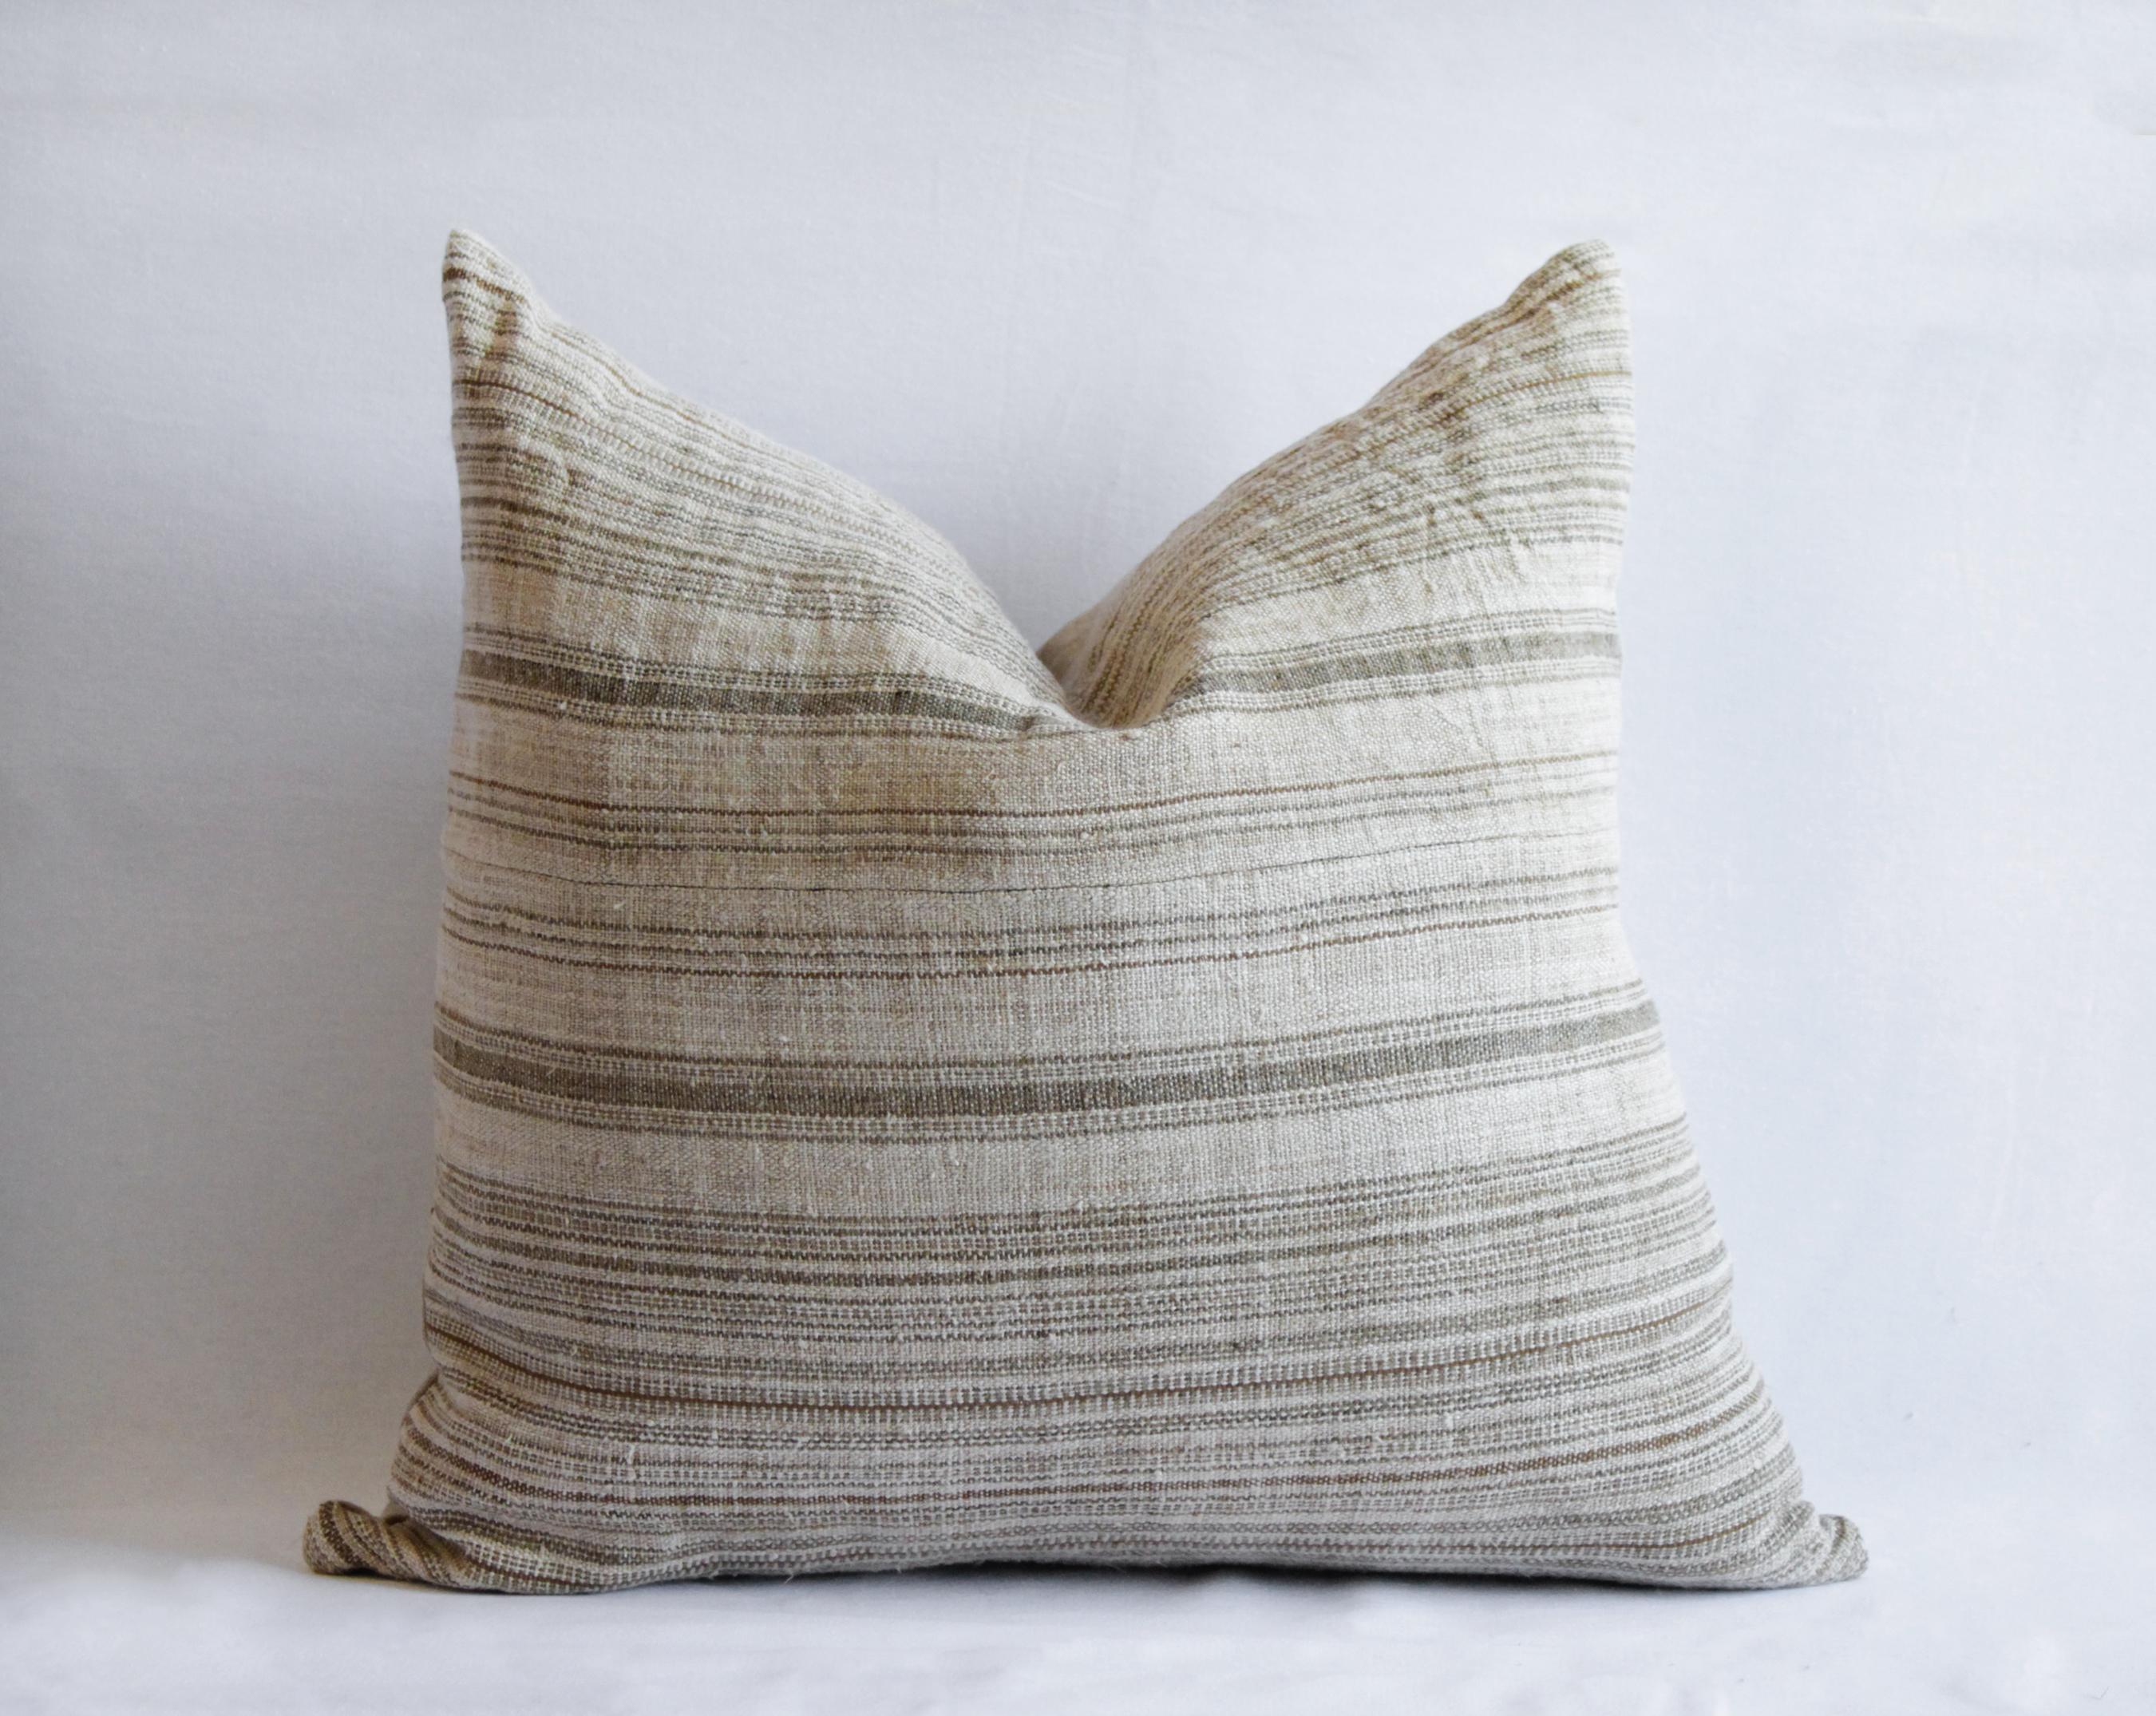 Antique homespun linen pillows in natural and brown stripe by Full Bloom Cottage
Custom made from antique textiles, these pillows are so beautiful with a natural background color, and tonal brown stripes. Backing is a flax Belgian linen.
Hidden